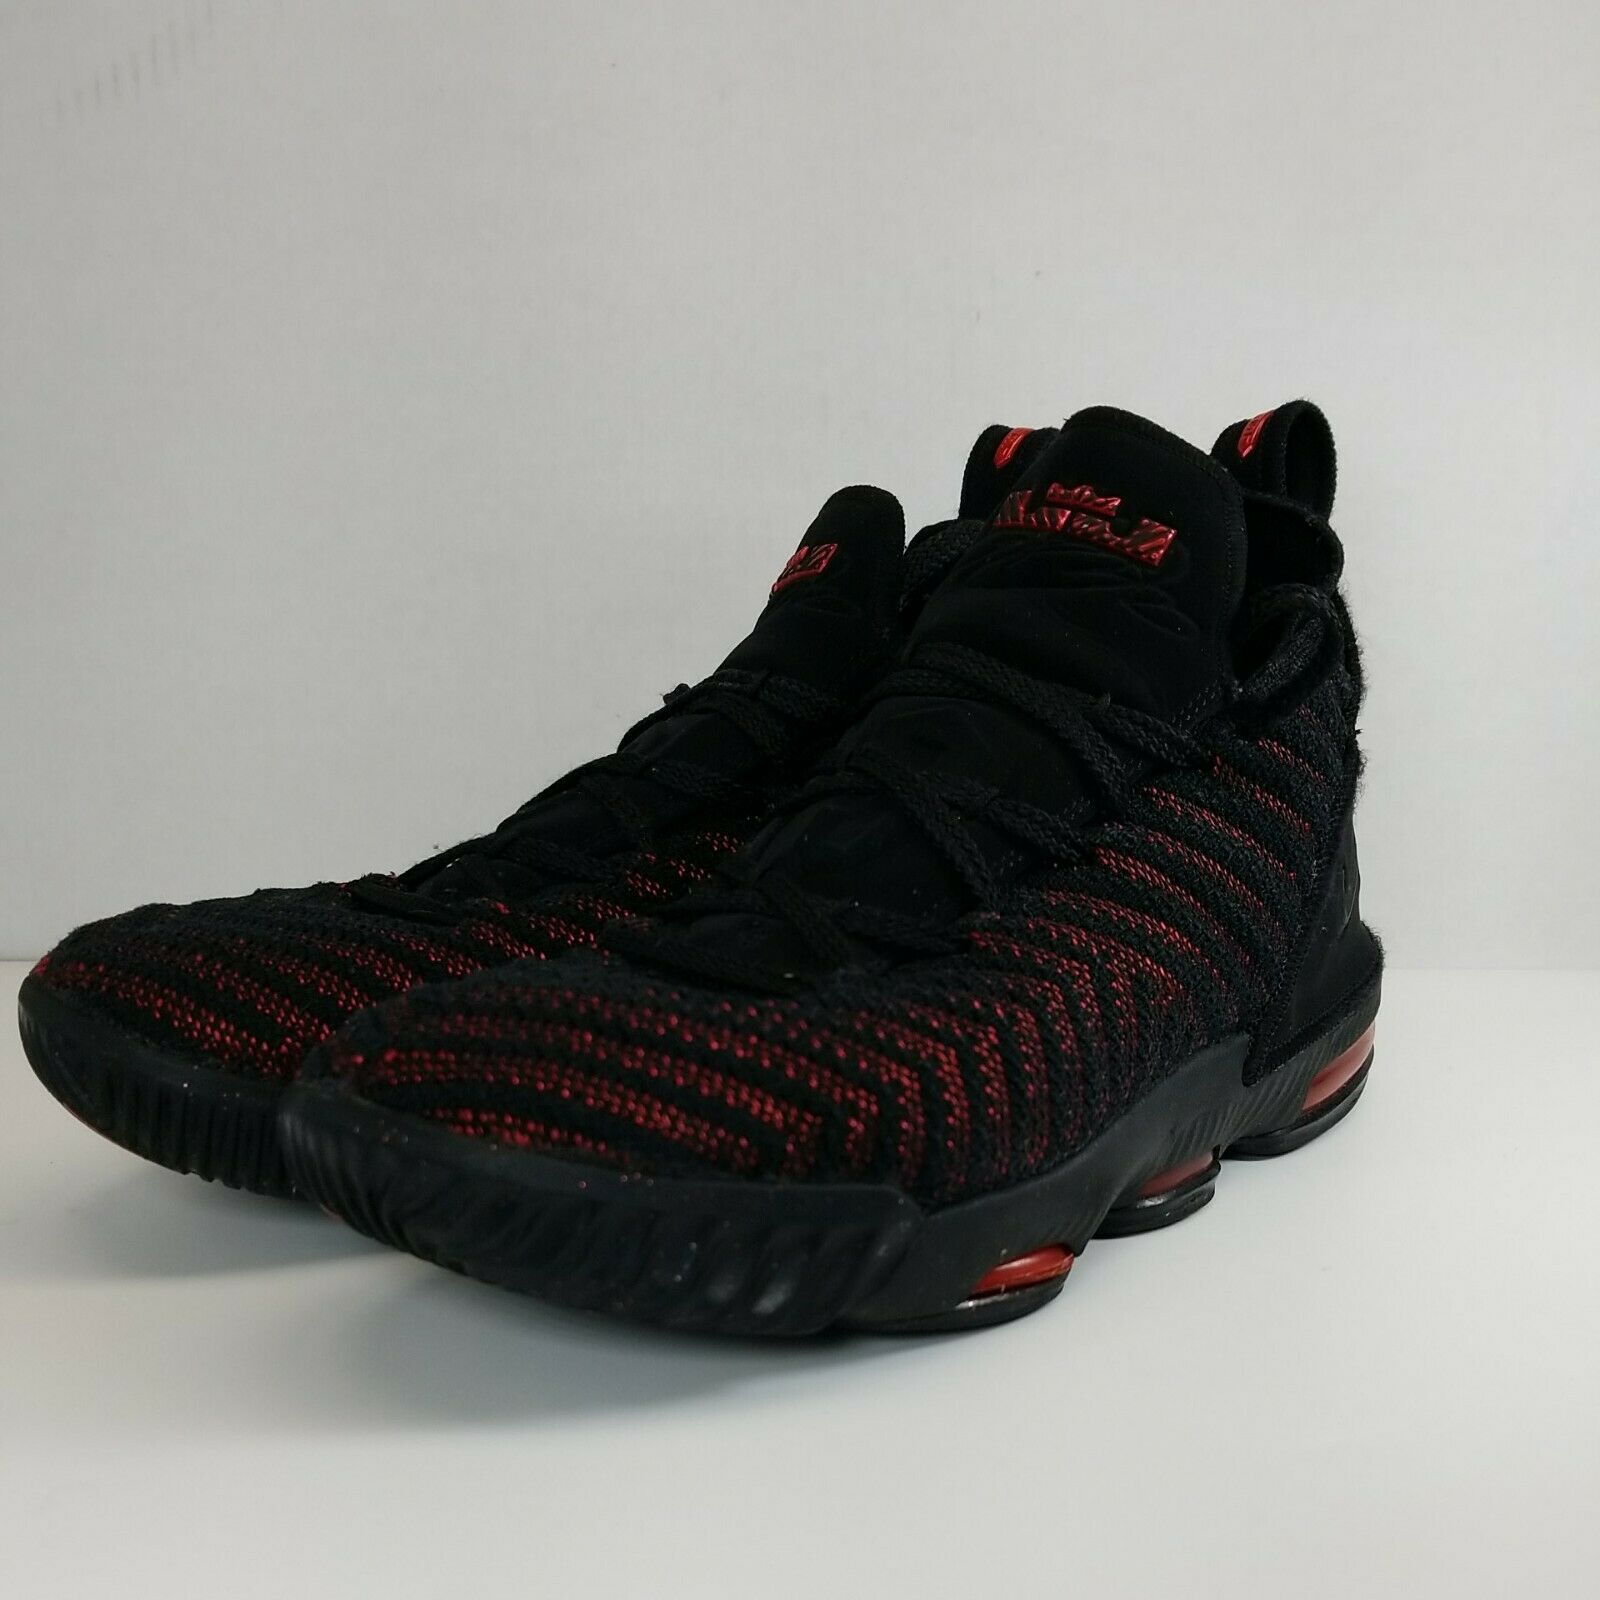 Nike Lebron 16 Youth Size 6 Y AQ2465-002 Black Red Basketball Shoes Lace Up